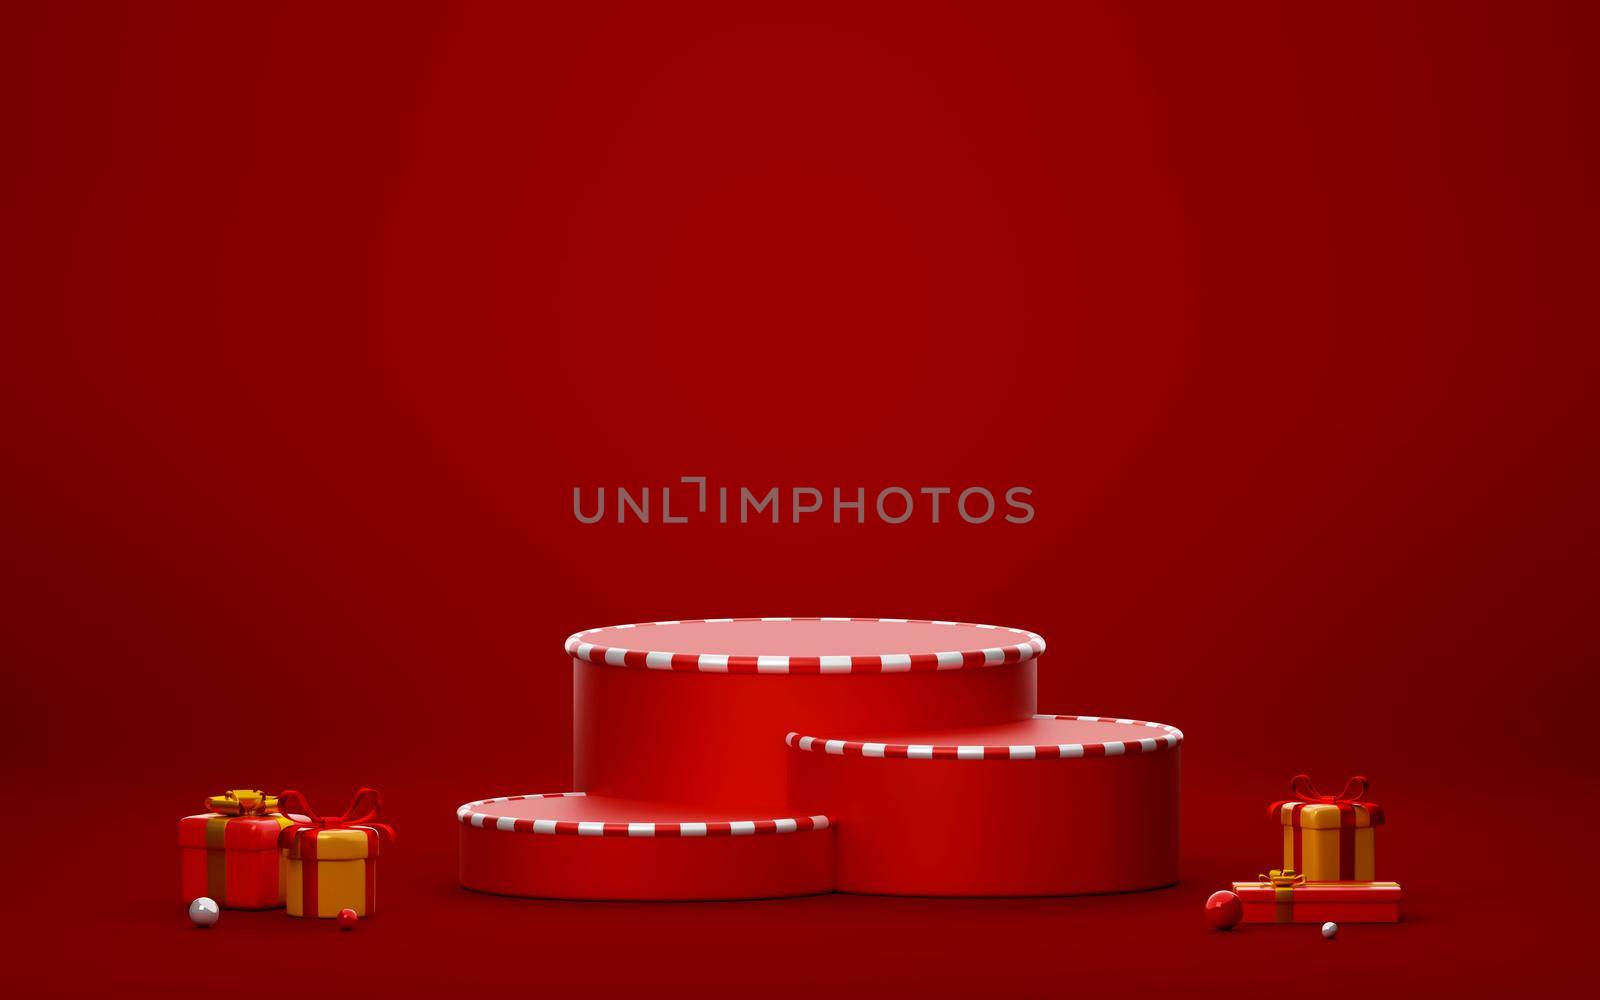 Christmas podium with gift for product advertisement, 3d illustration